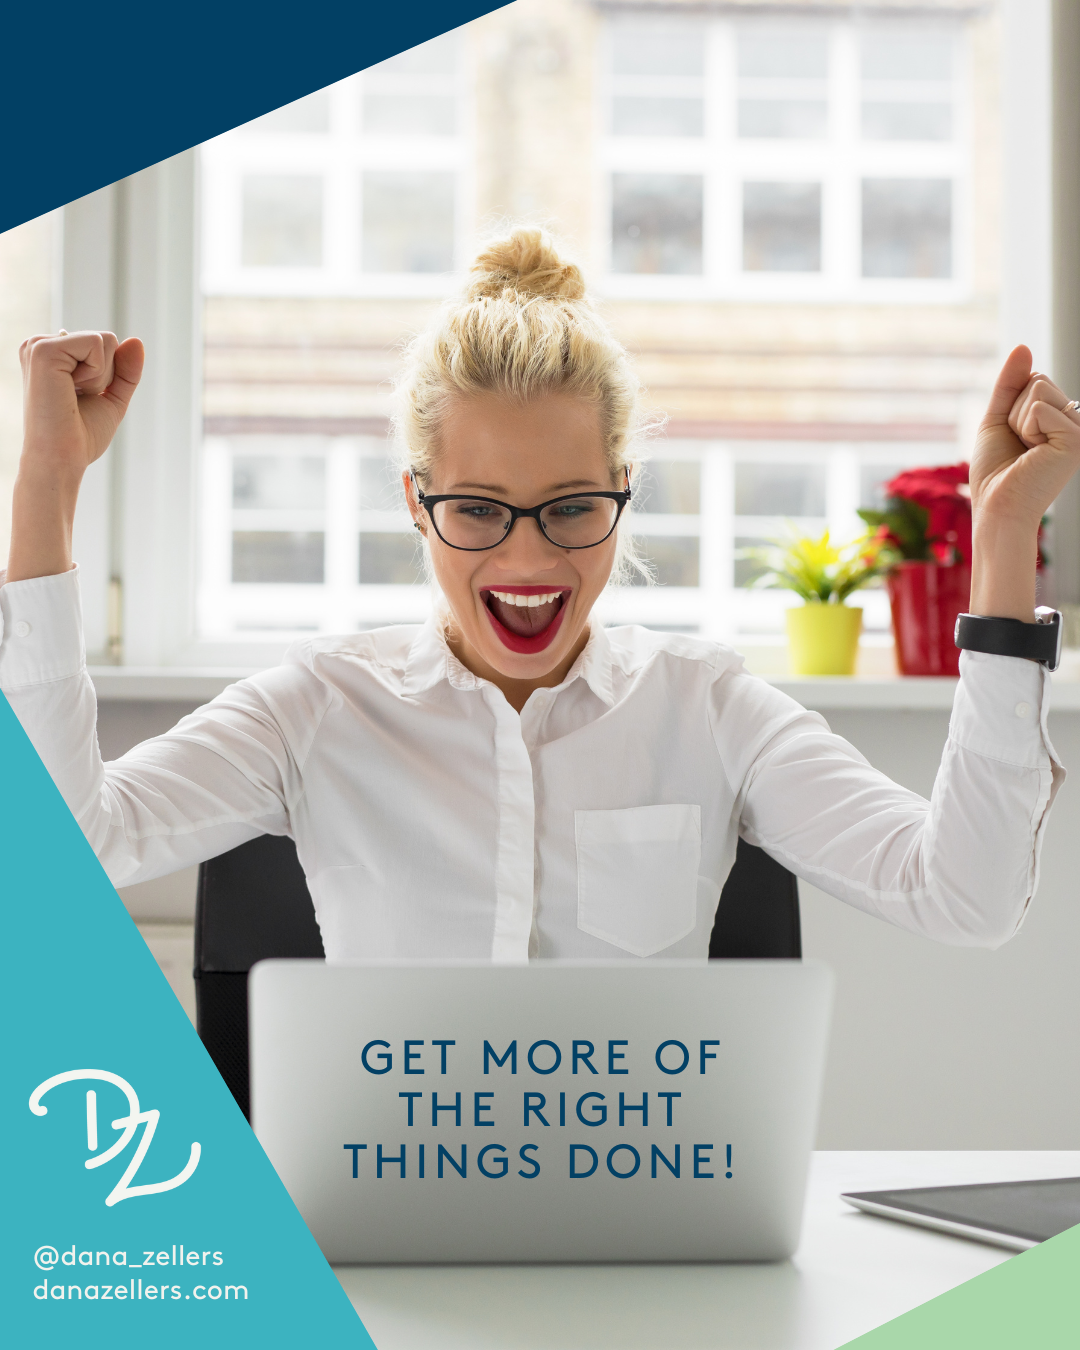 Get More of the Right Things Done